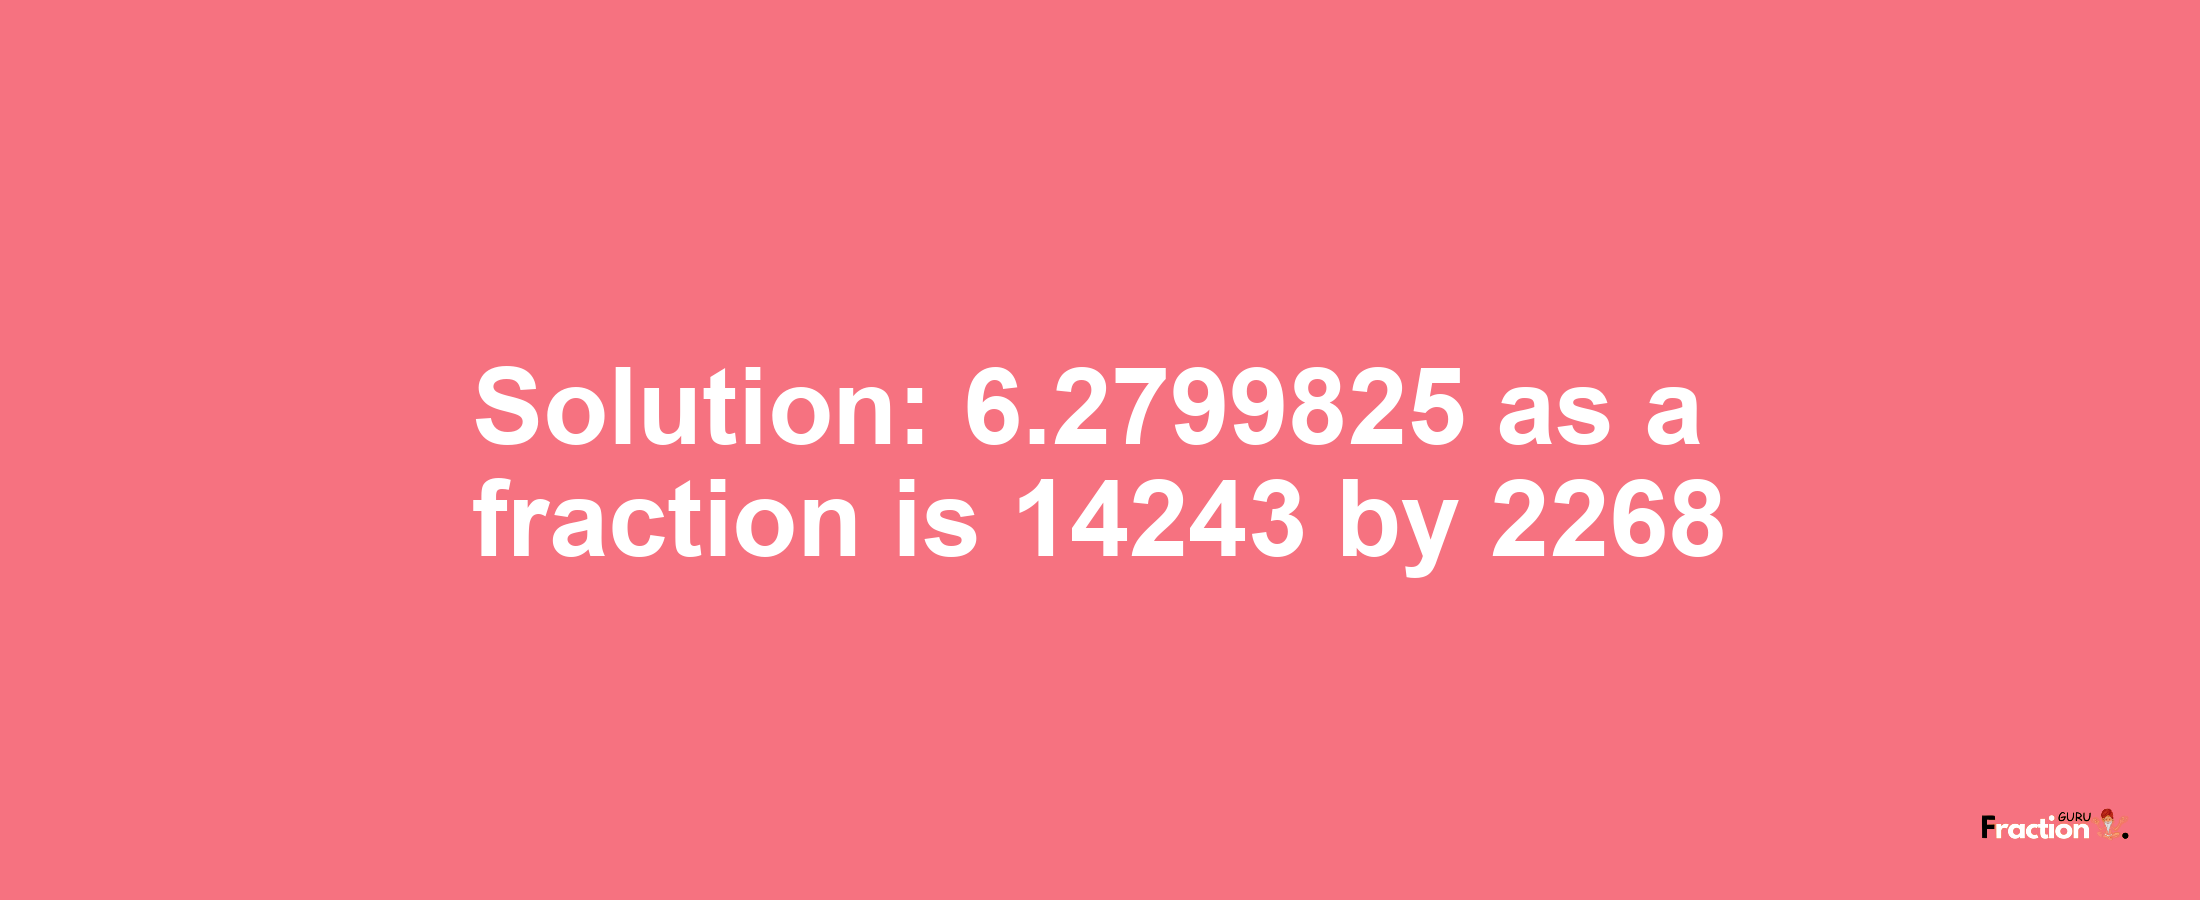 Solution:6.2799825 as a fraction is 14243/2268